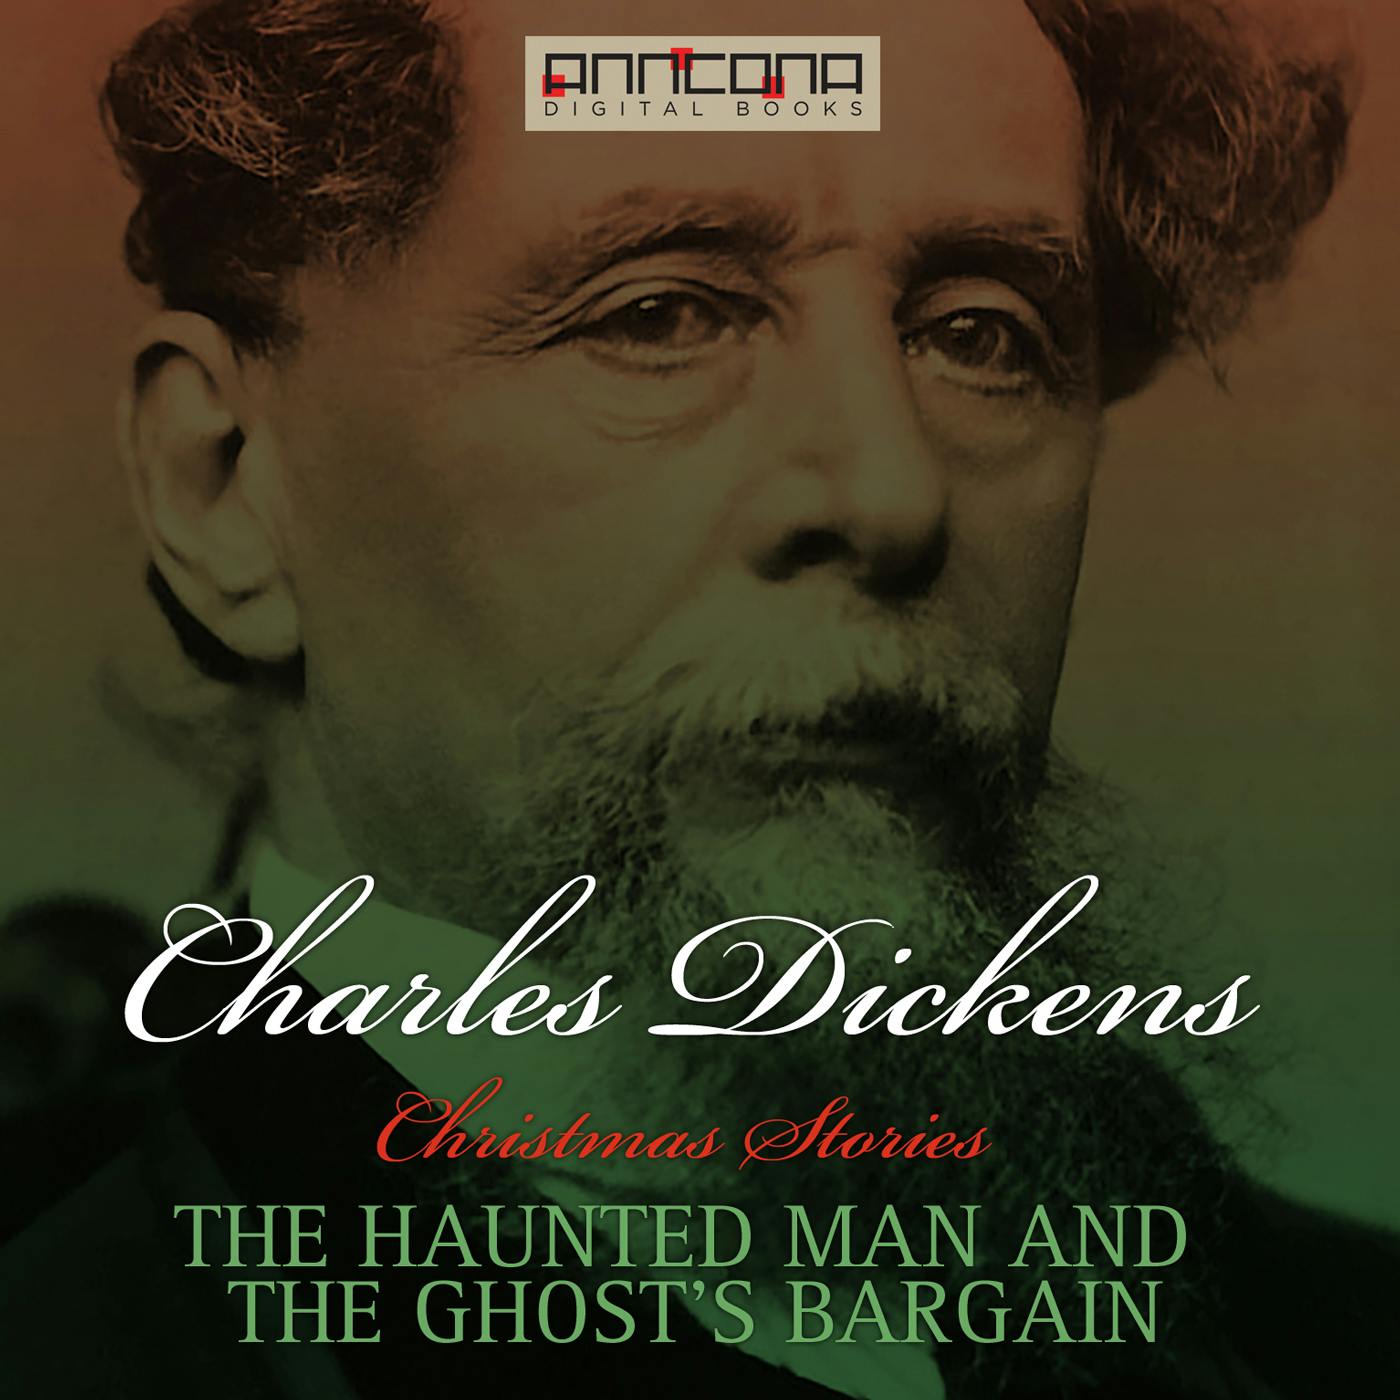 The Haunted Man and the Ghost's Bargain - Charles Dickens